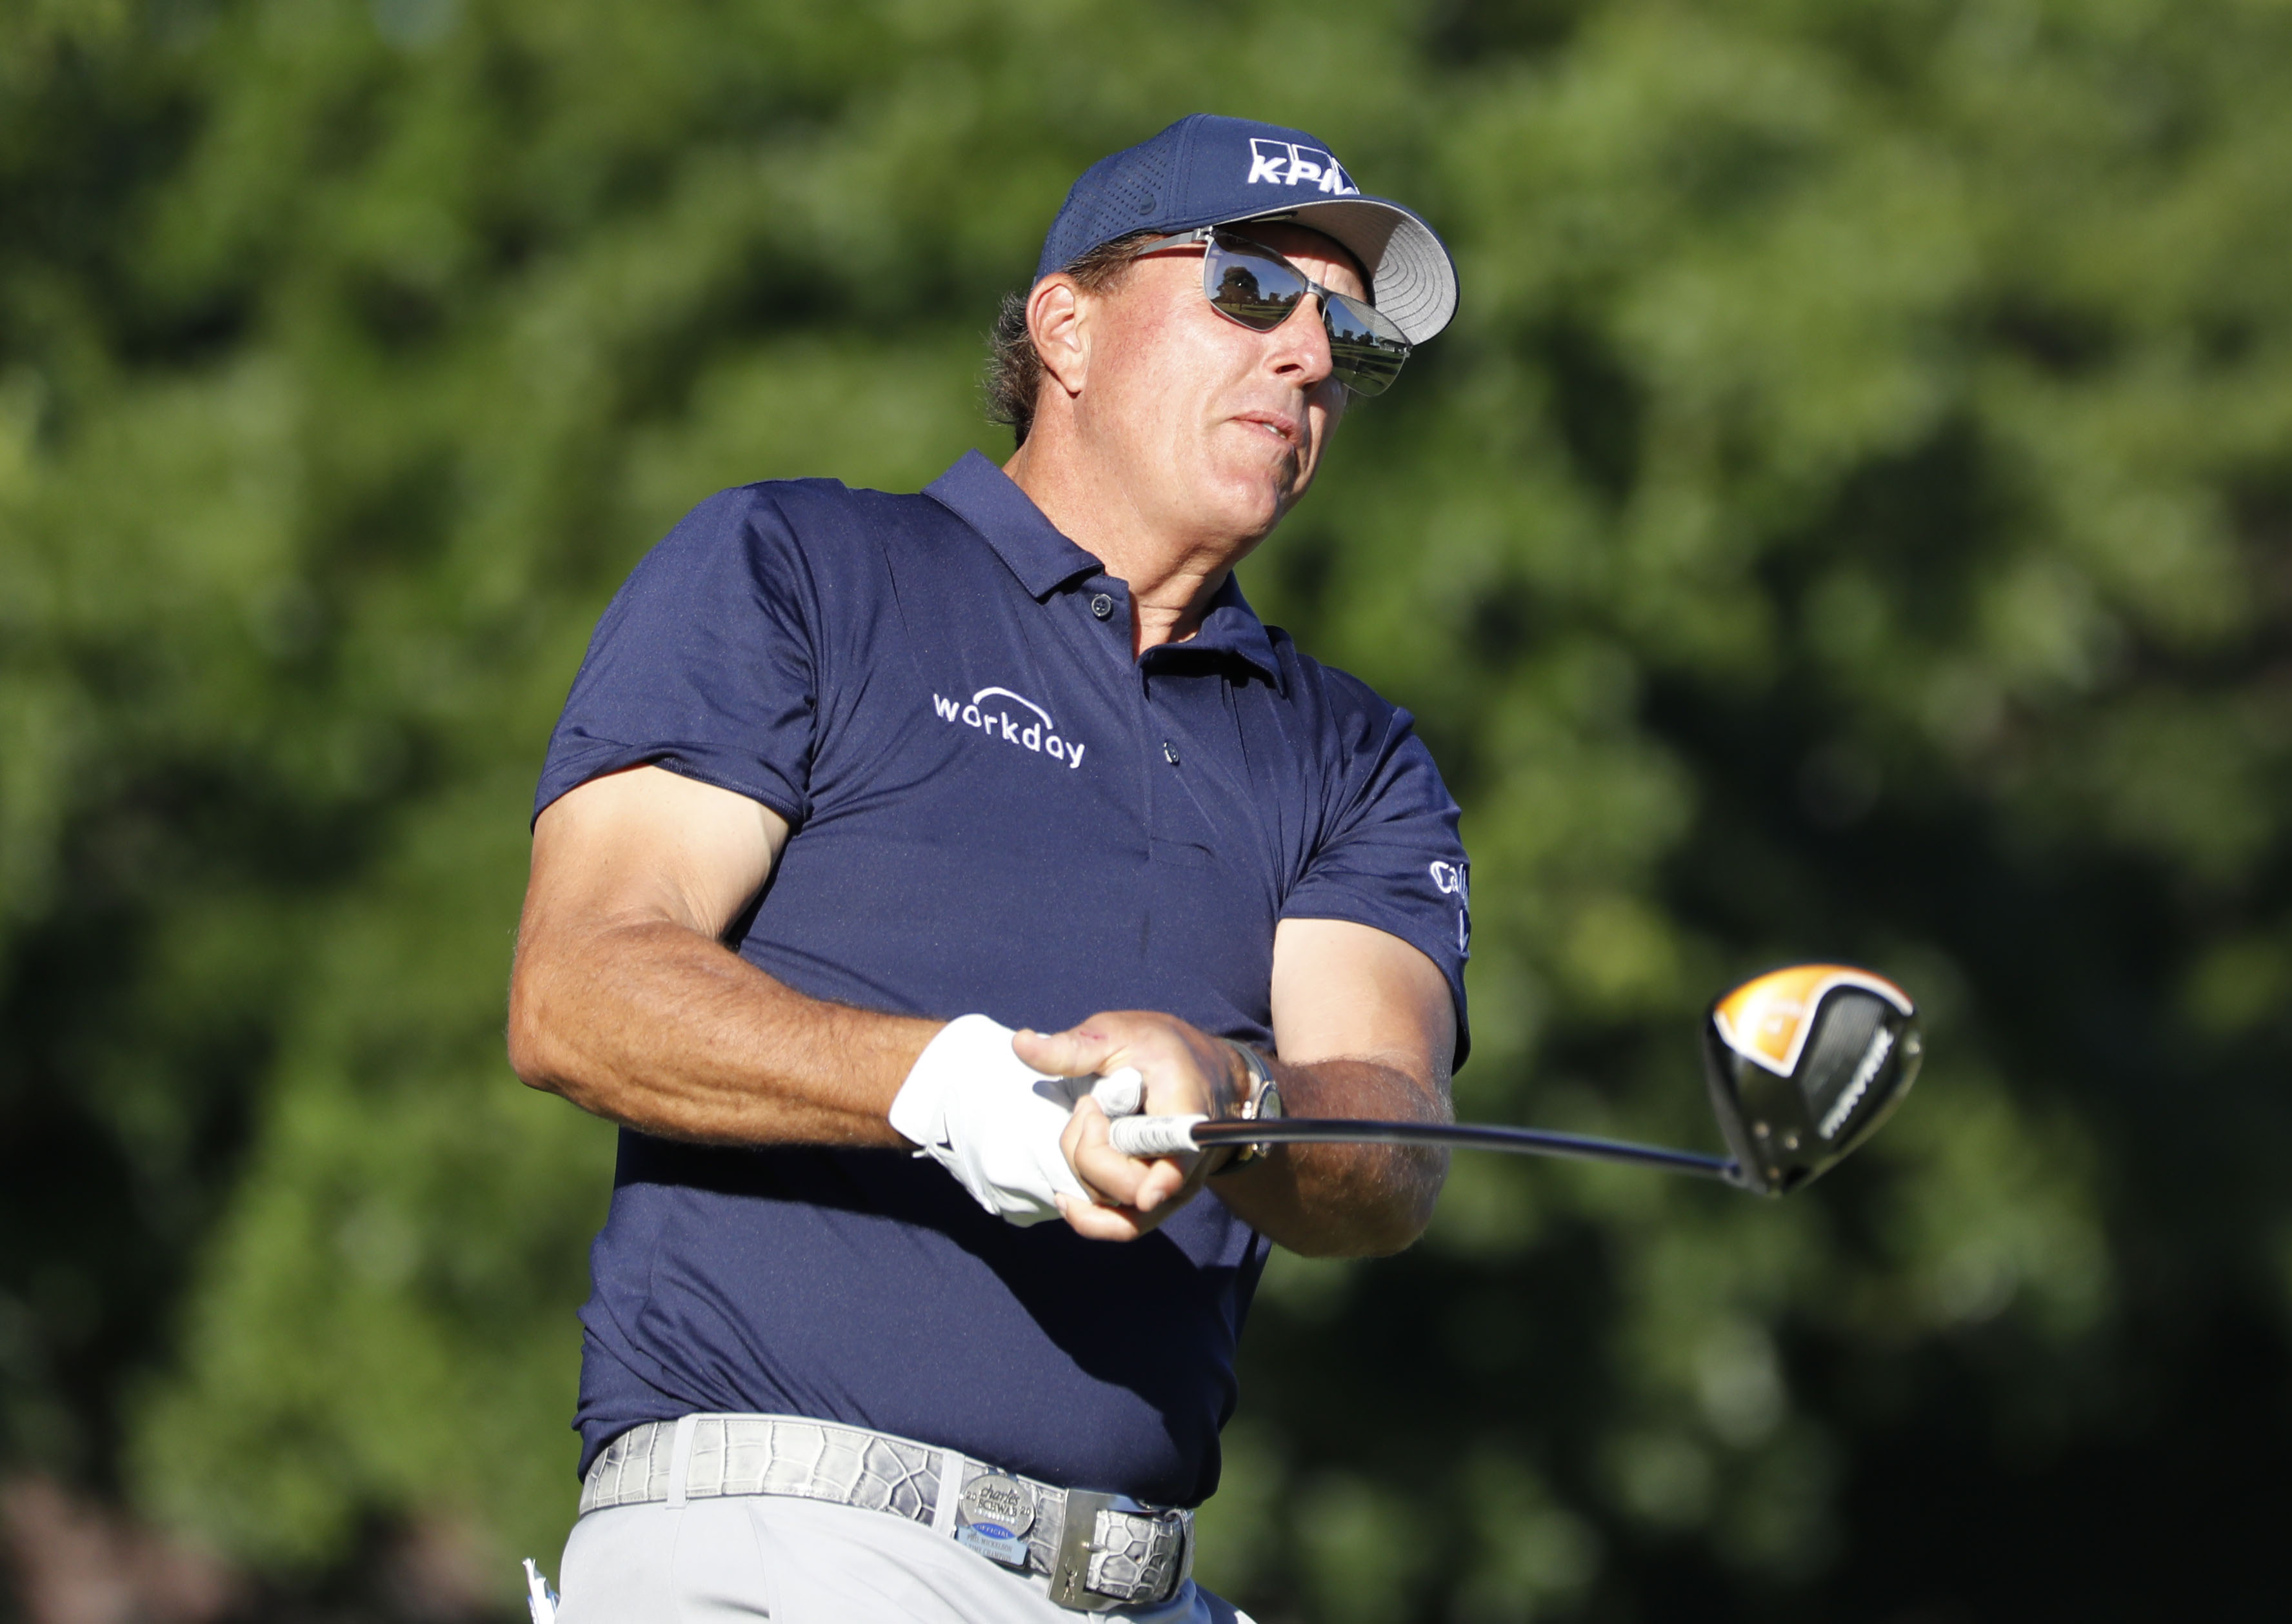 Will Phil Mickelson win on PGA Tour after turning 50?